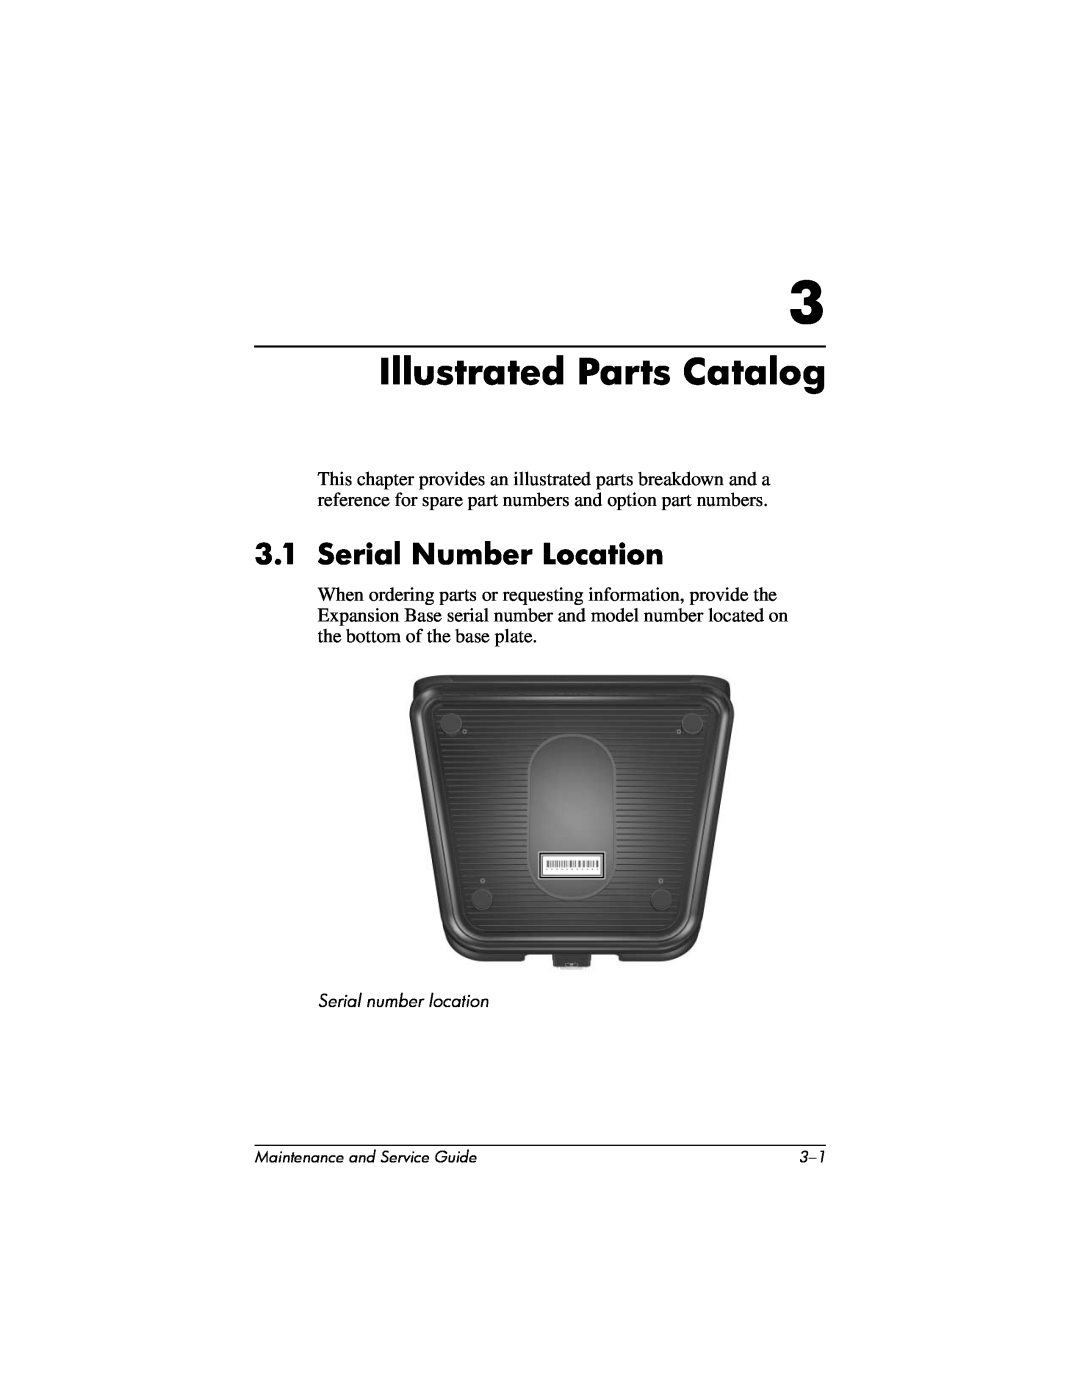 HP R3000T, R3065US, R3070US, R3060US, R3050US, R3056RS, R3050EA, R3060EA, R3001 Illustrated Parts Catalog, Serial Number Location 